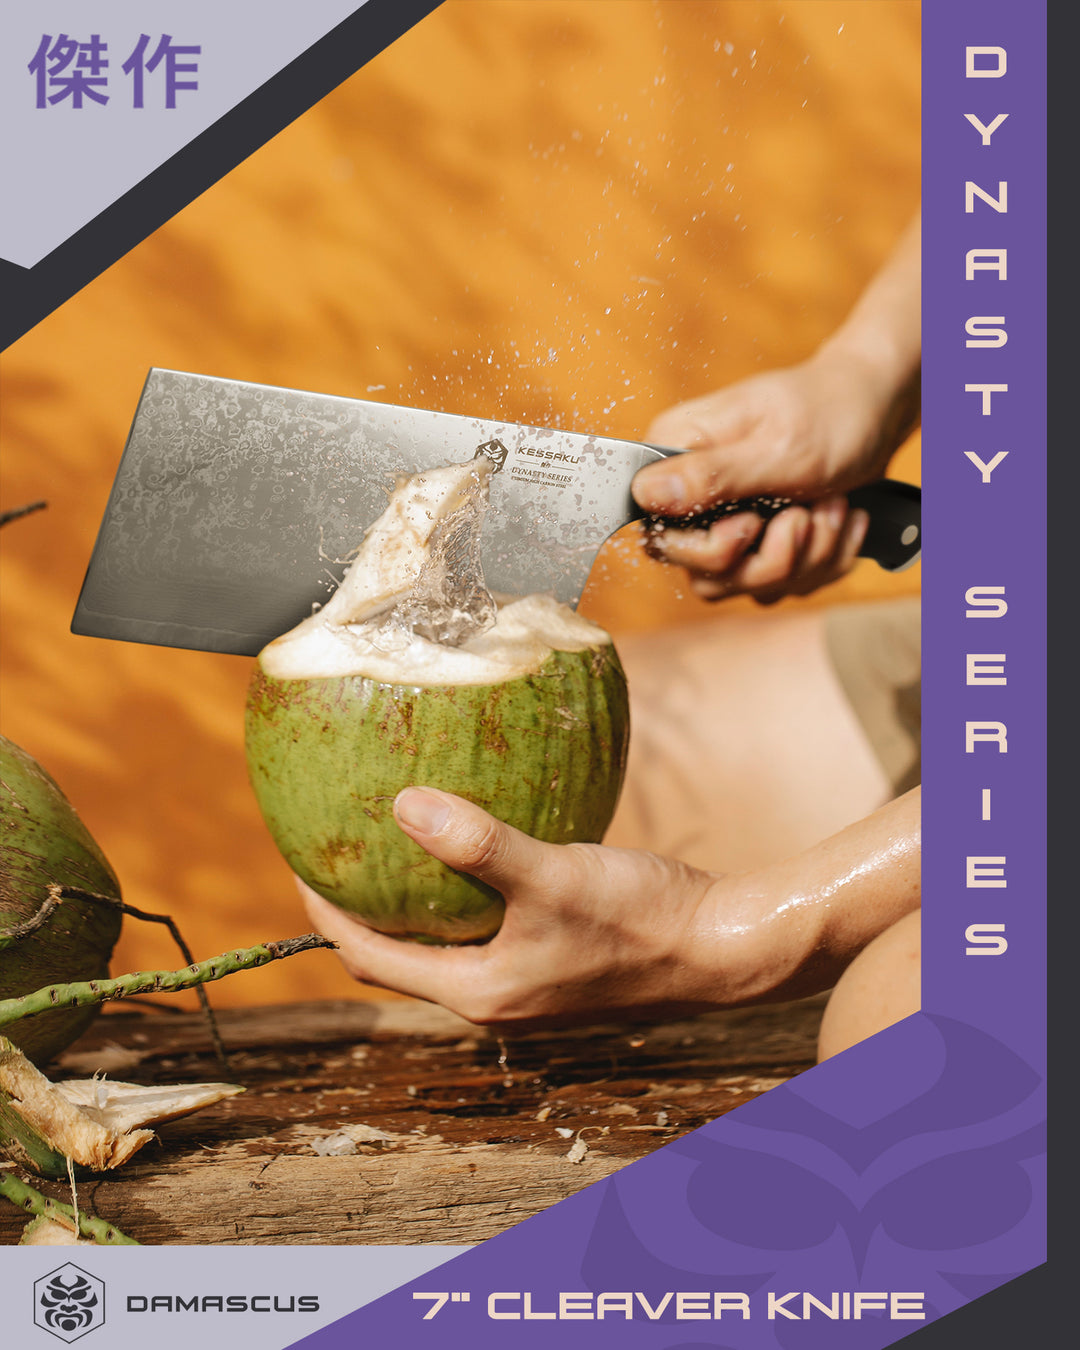 The Damascus Cleaver user to open a fresh coconut.